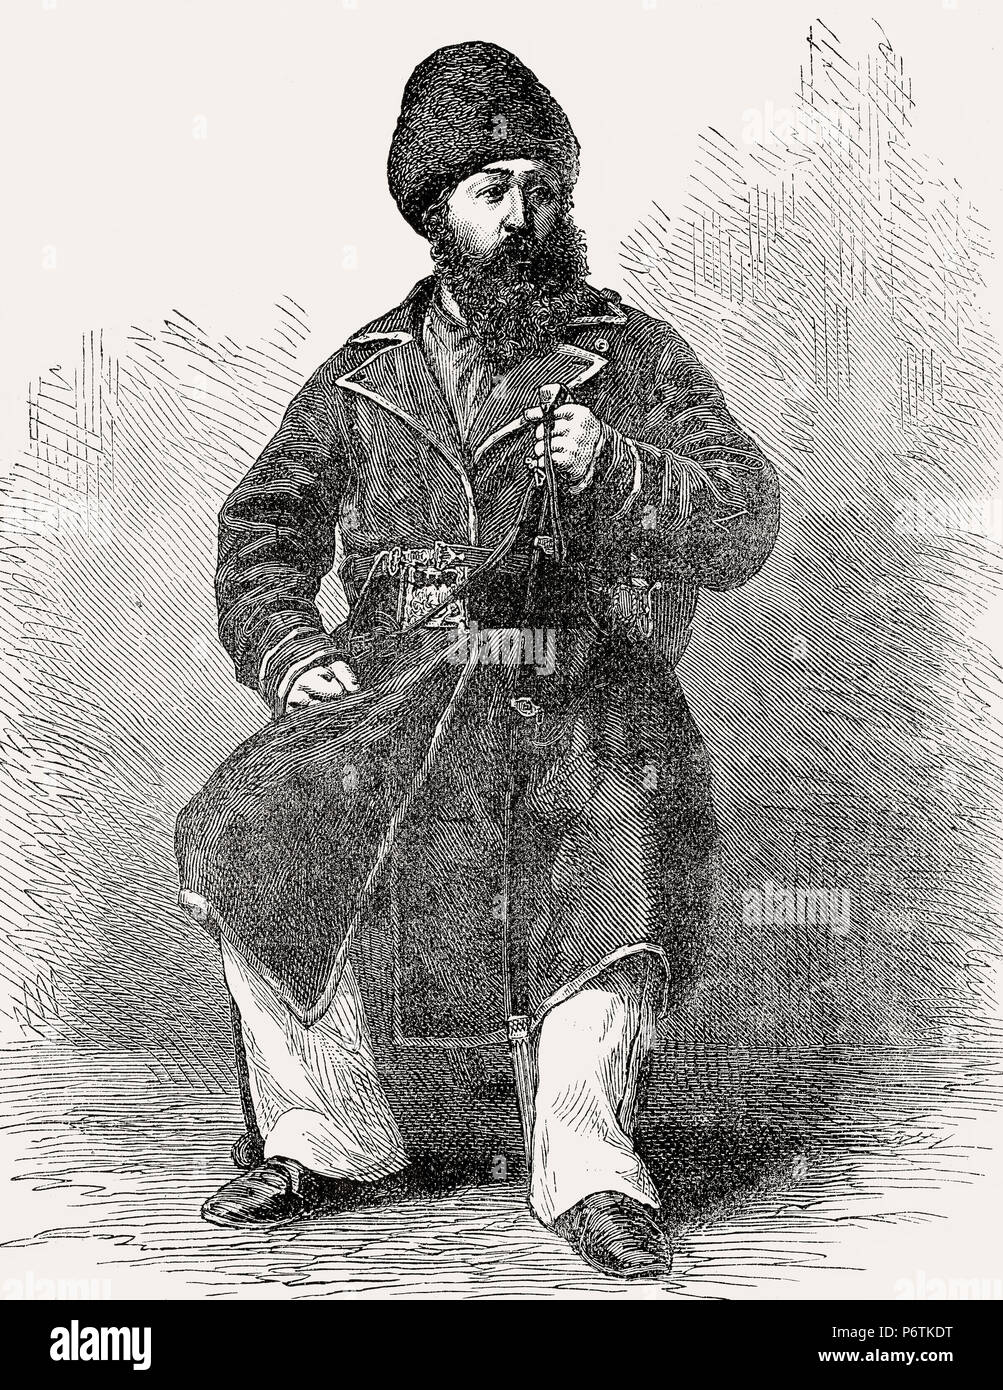 Sher Ali, 1825-1879, Amir of Afghanistan, From British Battles on Land and Sea, by James Grant Stock Photo